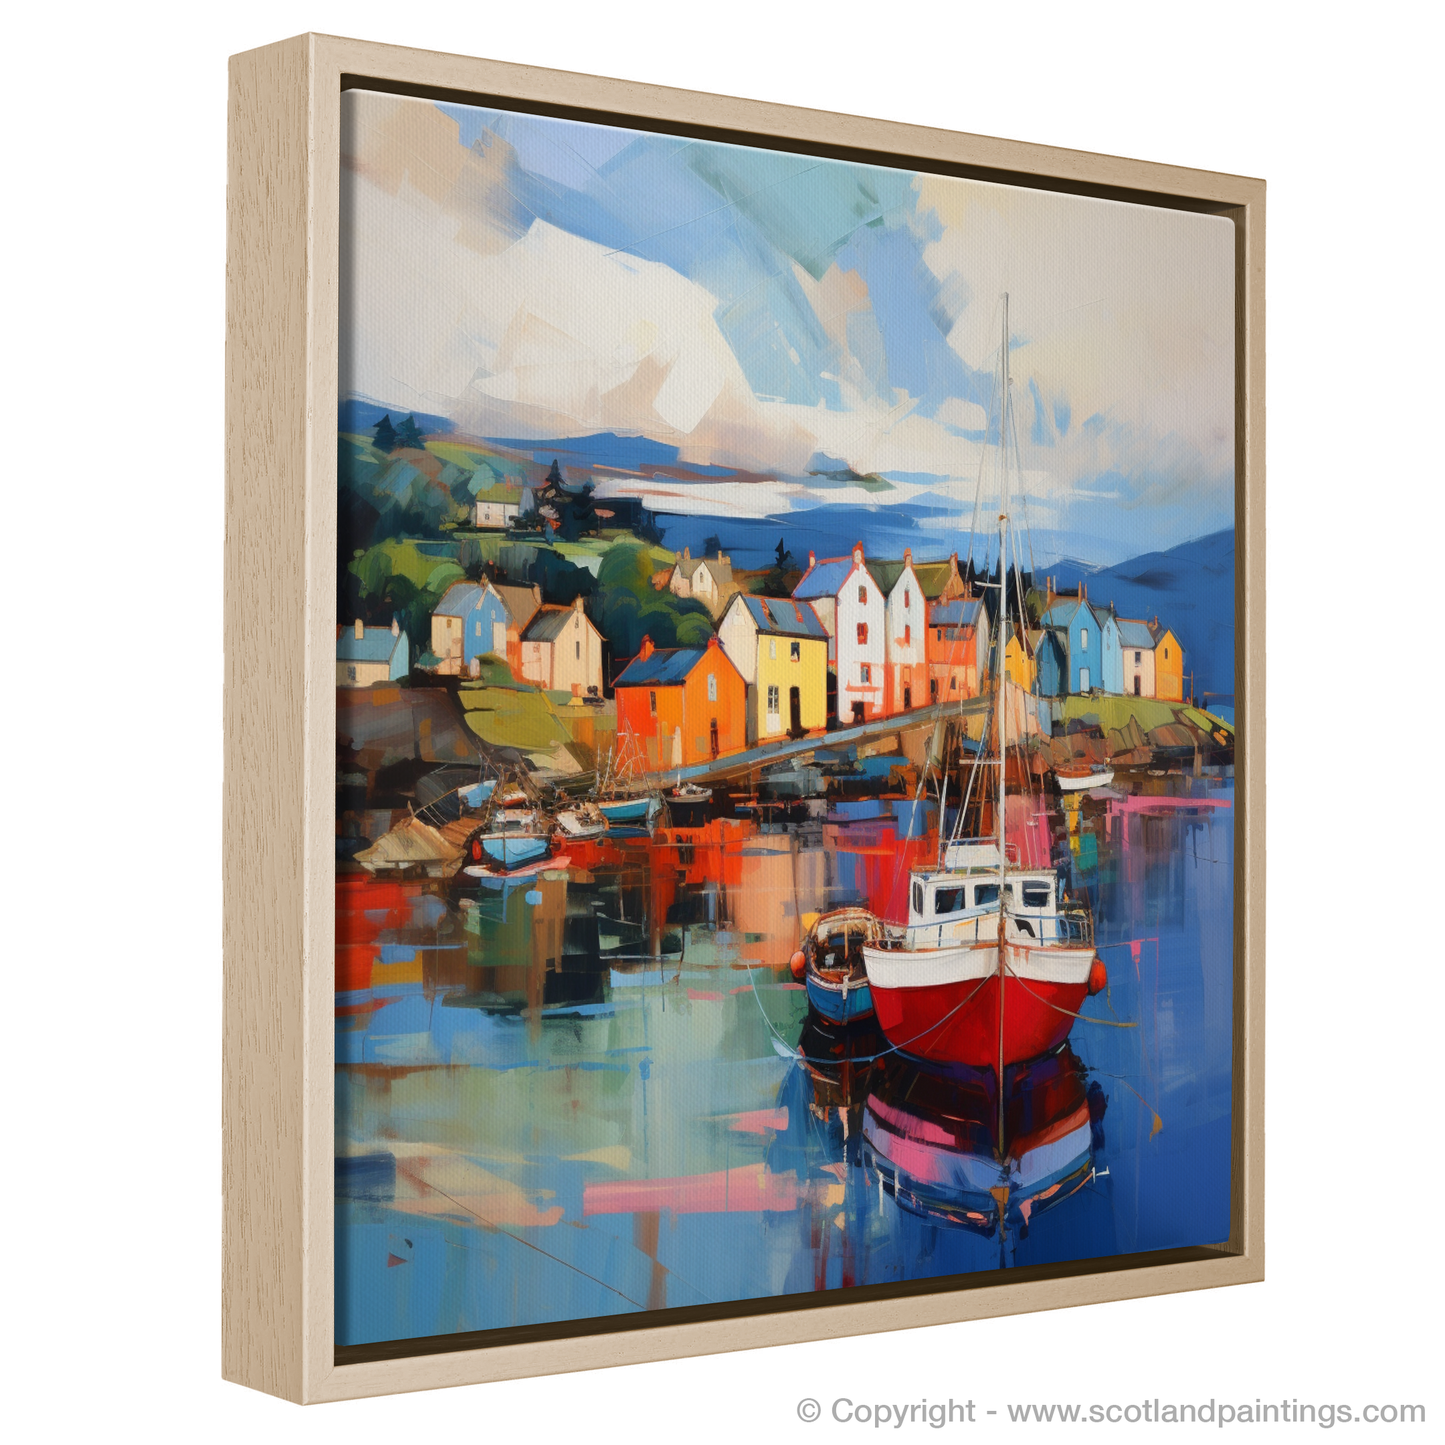 Painting and Art Print of Millport Harbour, Isle of Cumbrae entitled "Millport Harbour: An Expressionist Ode to Tranquility and Colour".